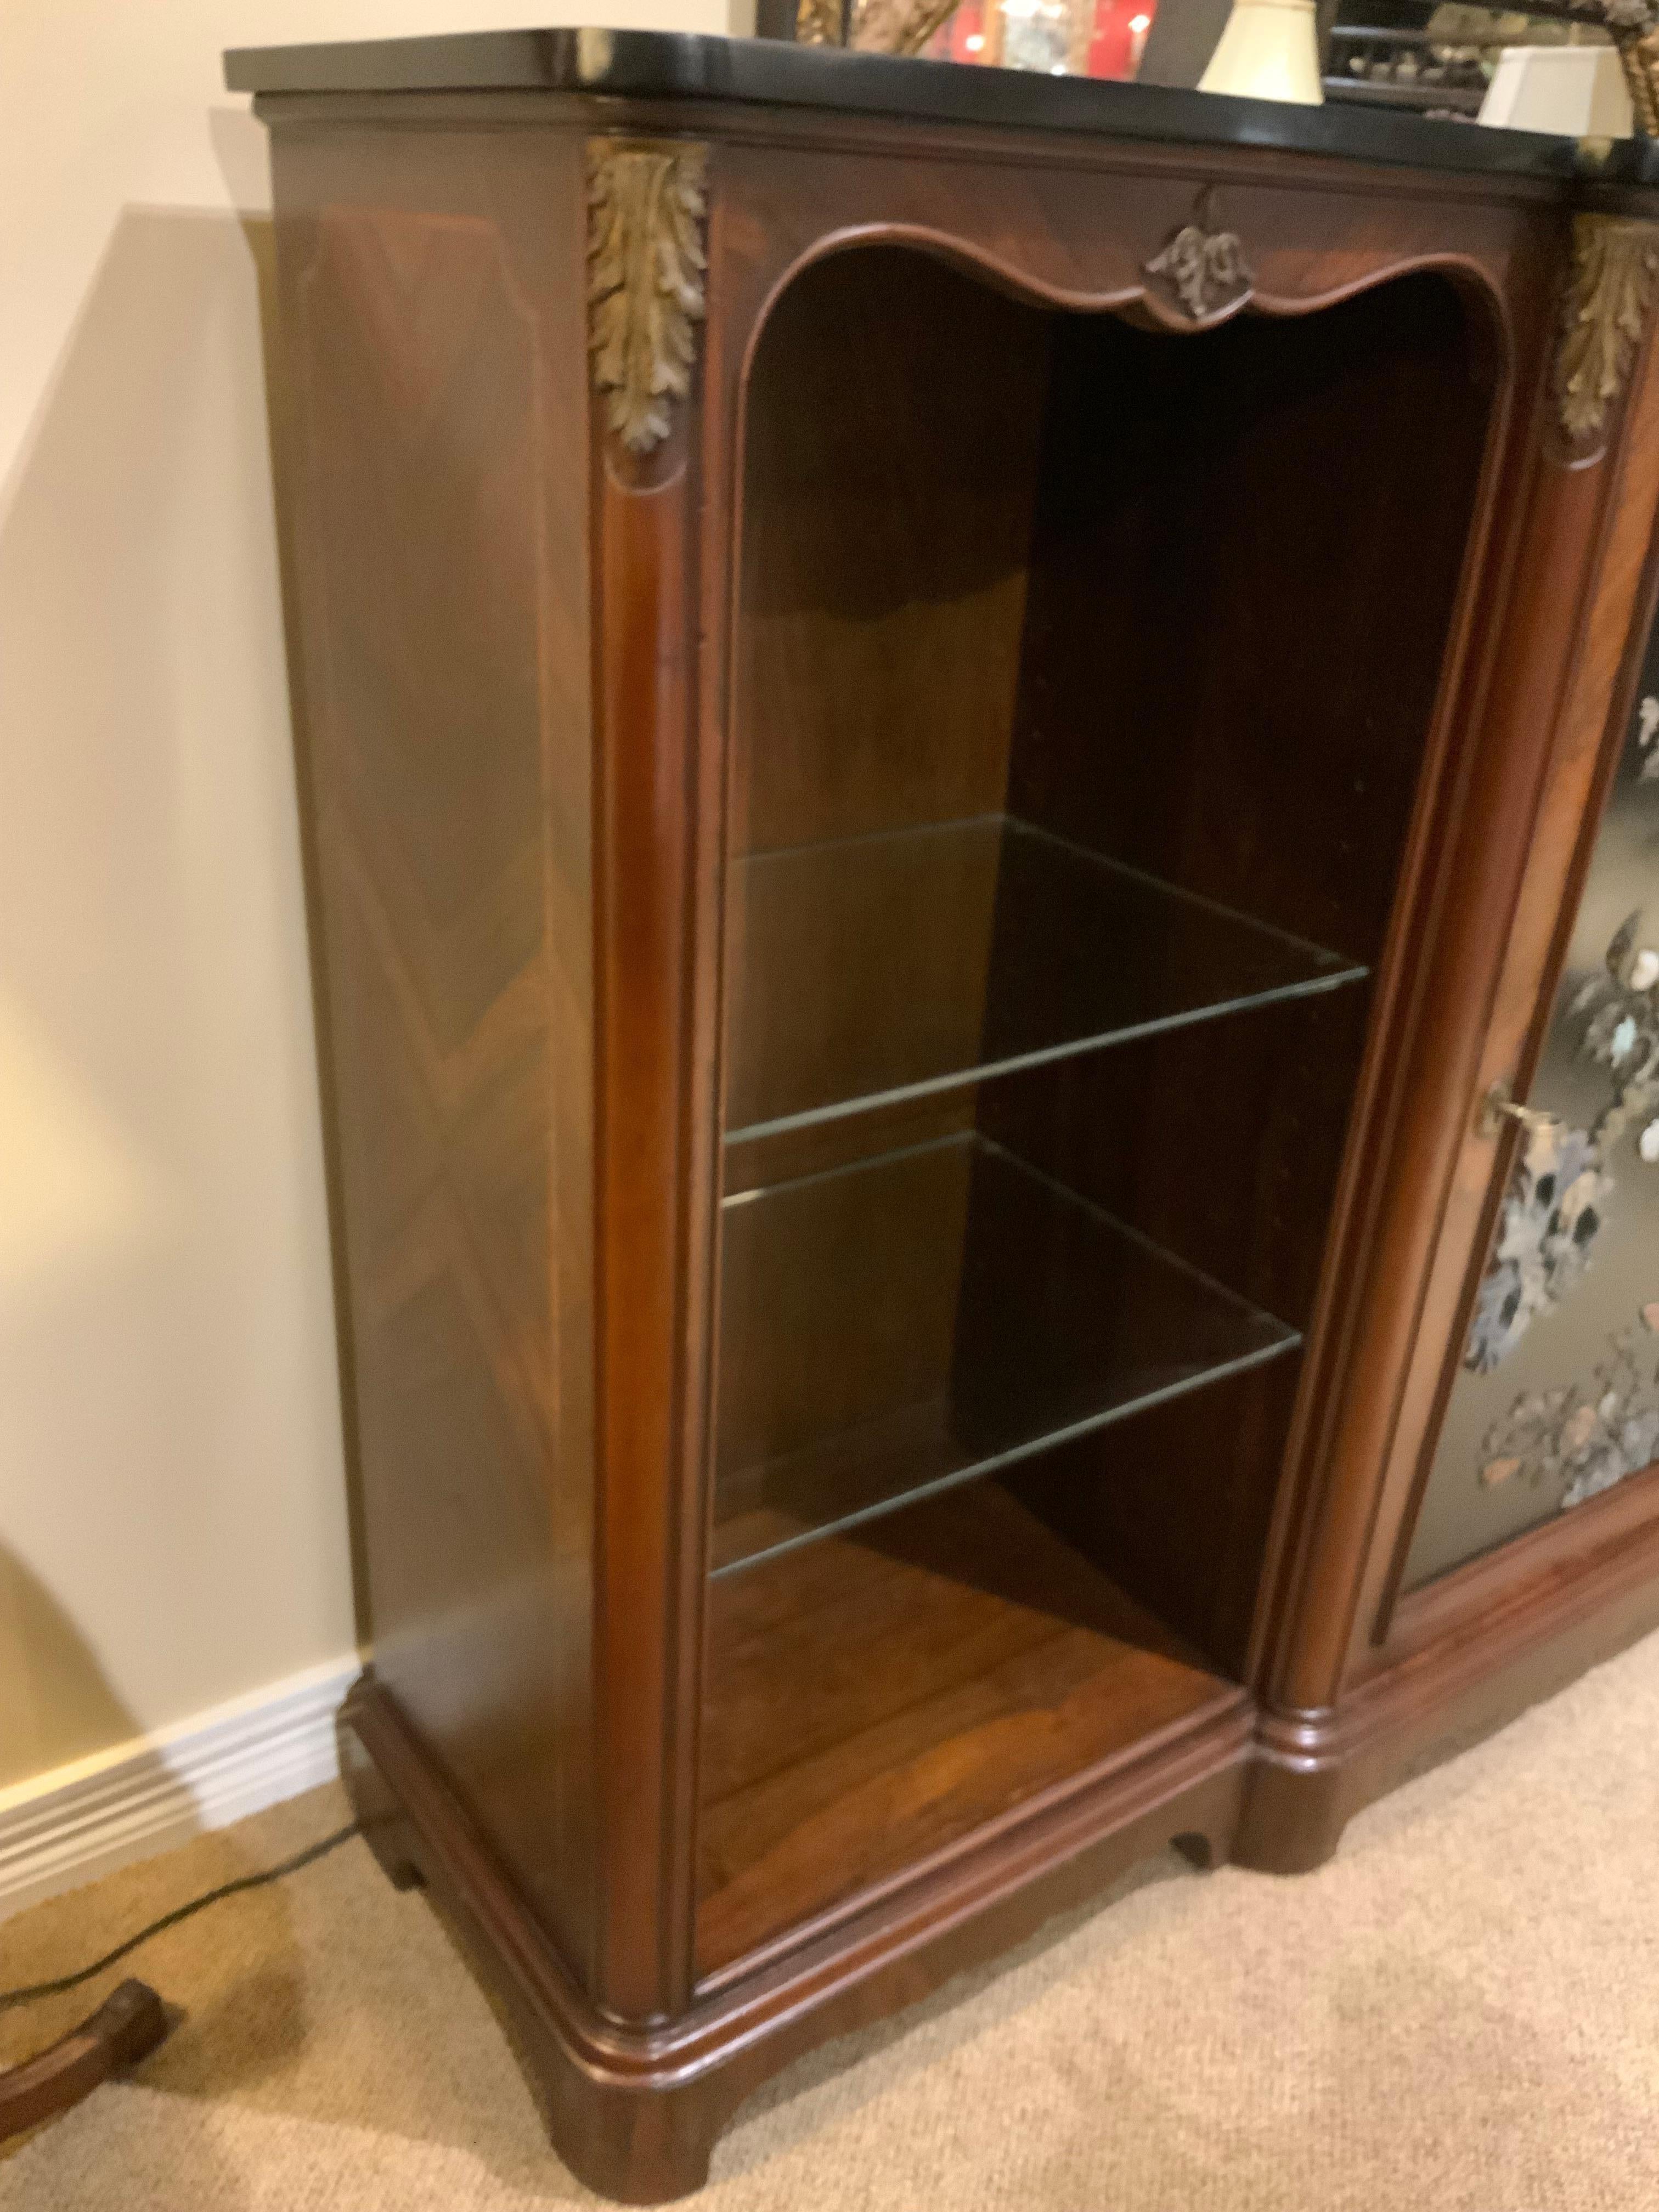 Chinoiserie bar cabinet/buffet with decorative semiprecious sones In Excellent Condition For Sale In Houston, TX